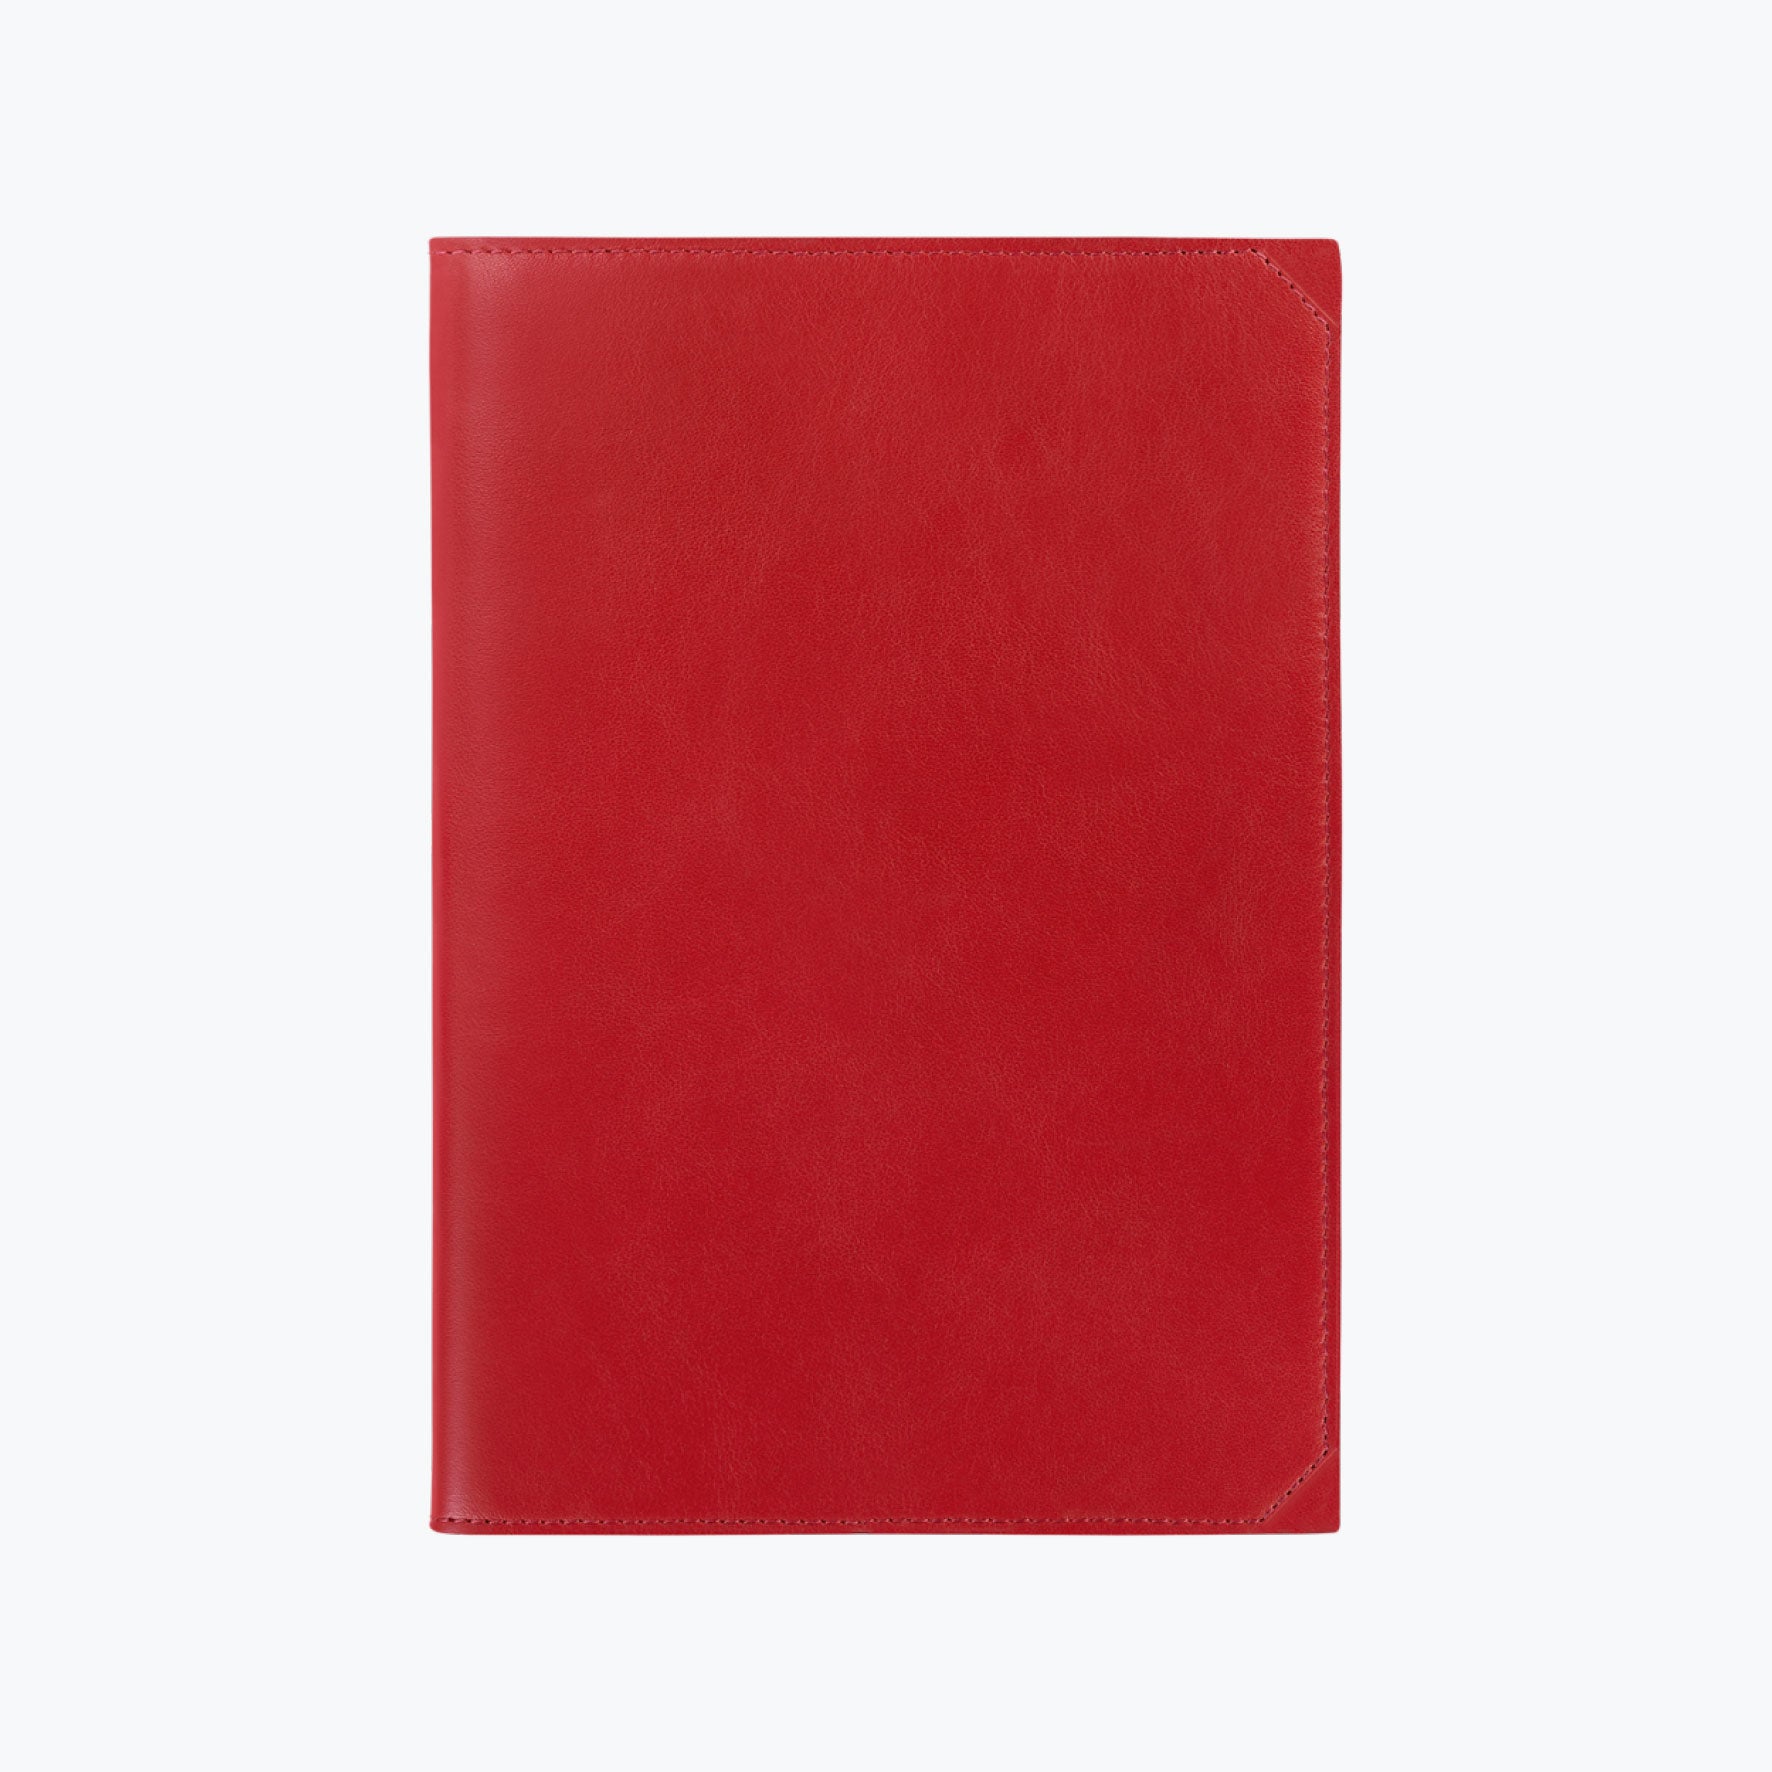 J. Herbin - Notebook - Leather - A5 - Red